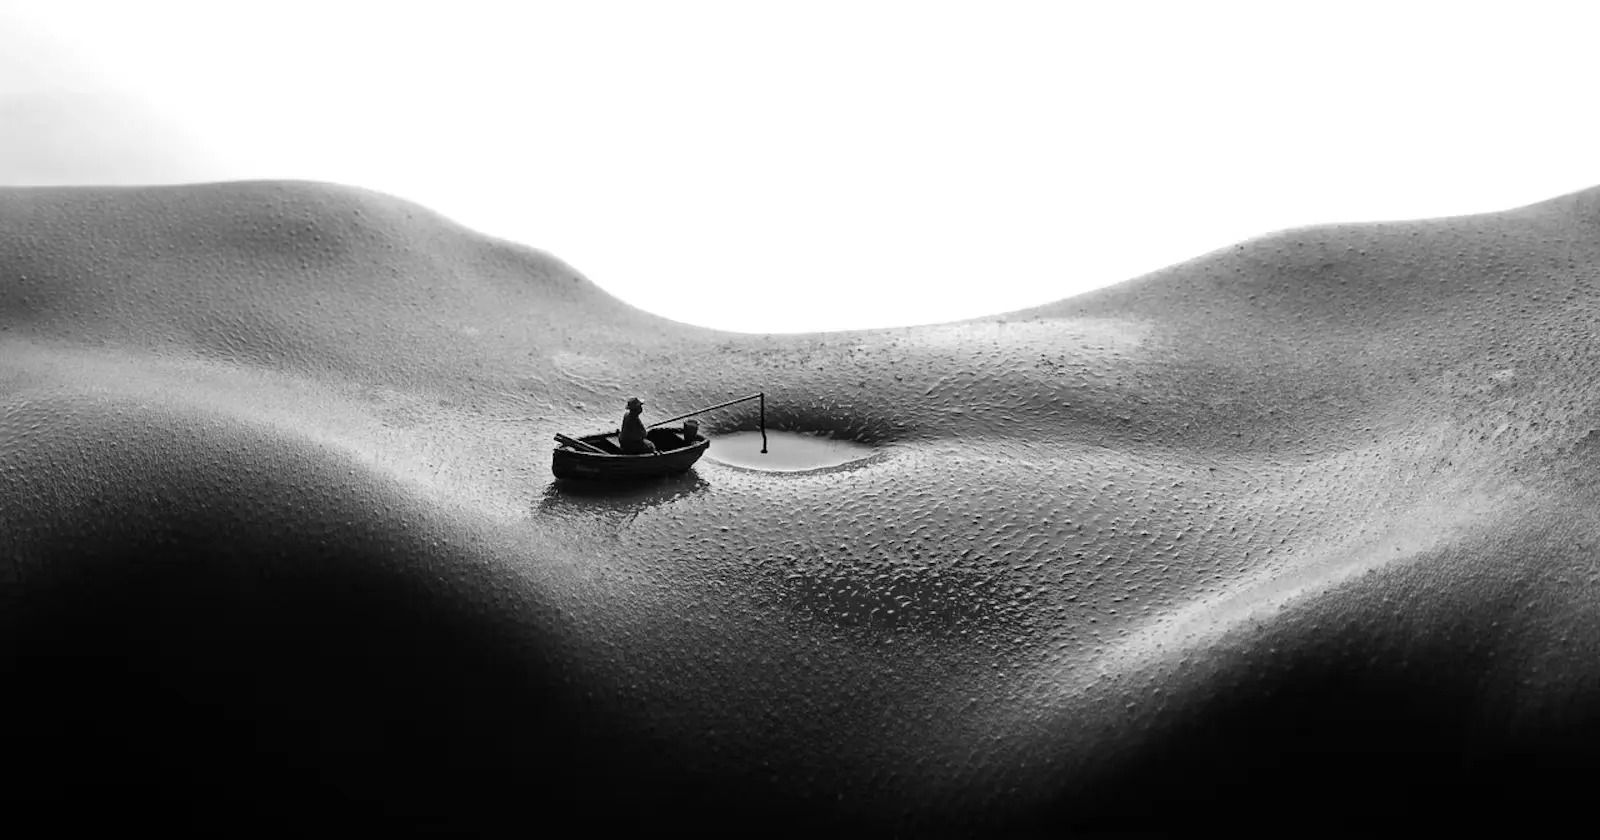 An abstract image of a womans stomach with her navel filled with water and someone in a boat near her belly button, as though on a lake. The image conveys the sensual nature of the poem titled "The visit"